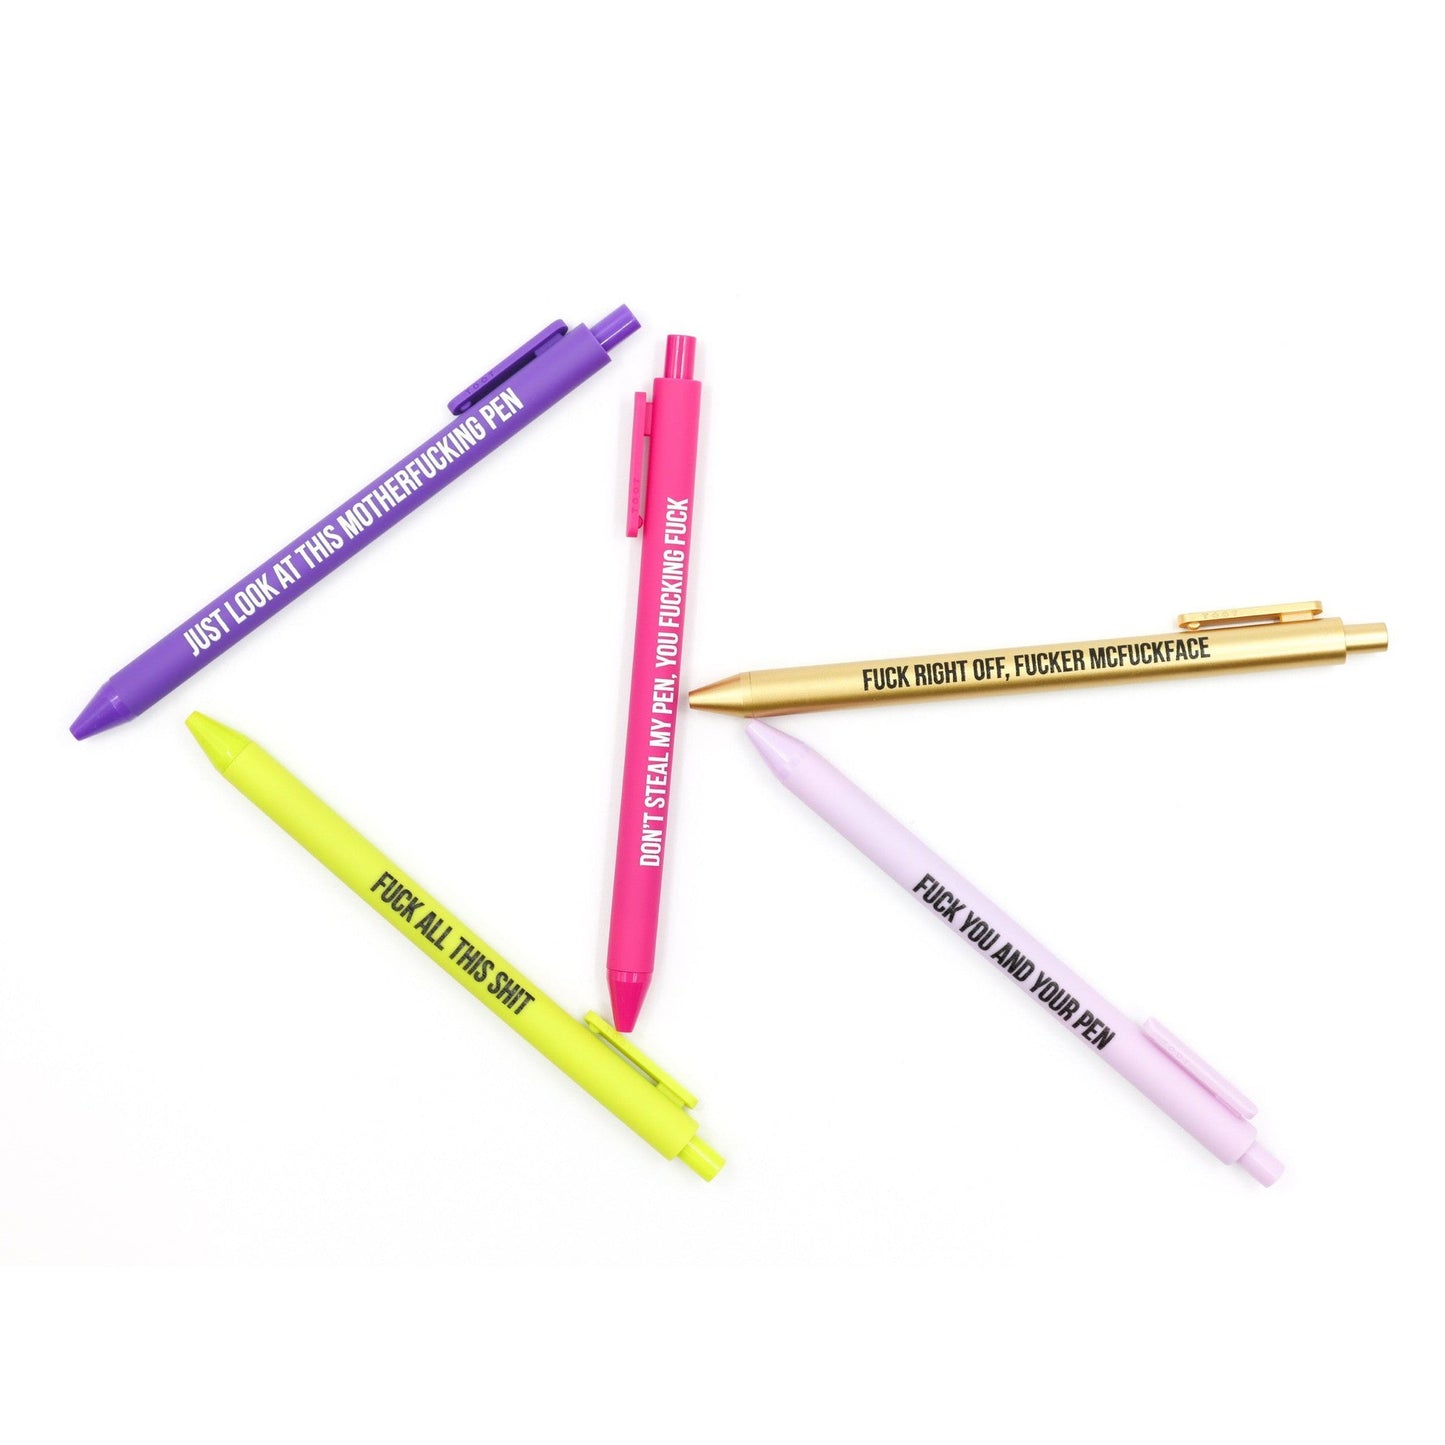 Sweary Fuck Pens Cussing Pen Gift Set - 5 Multicolored Gel Pens Rife with Profanity